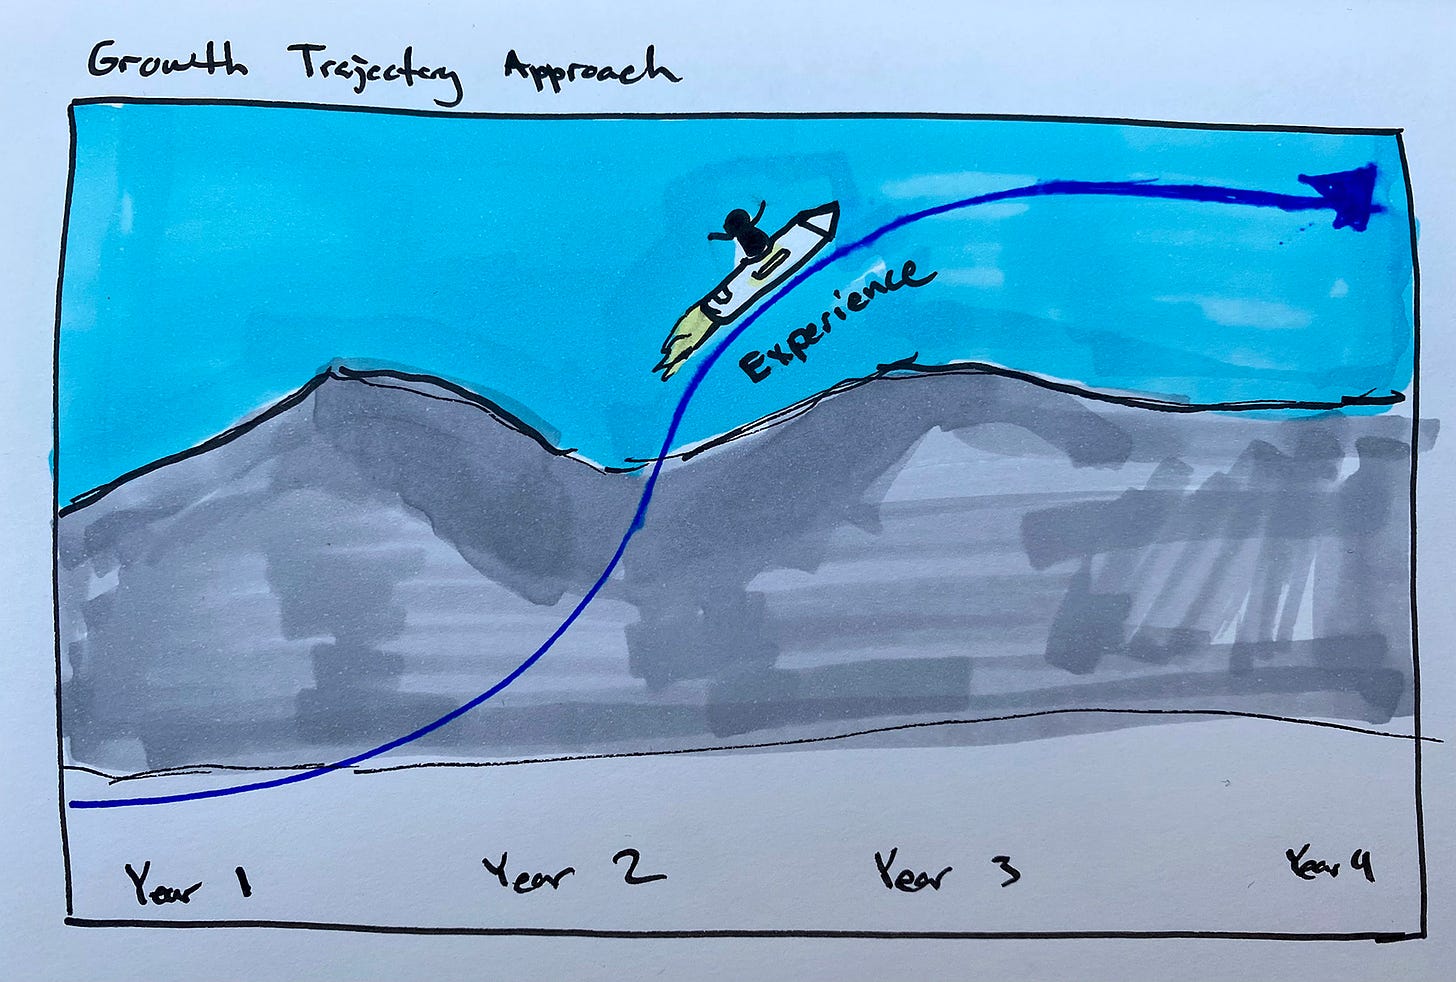 Trajectory based on experience: person on a rocket ship